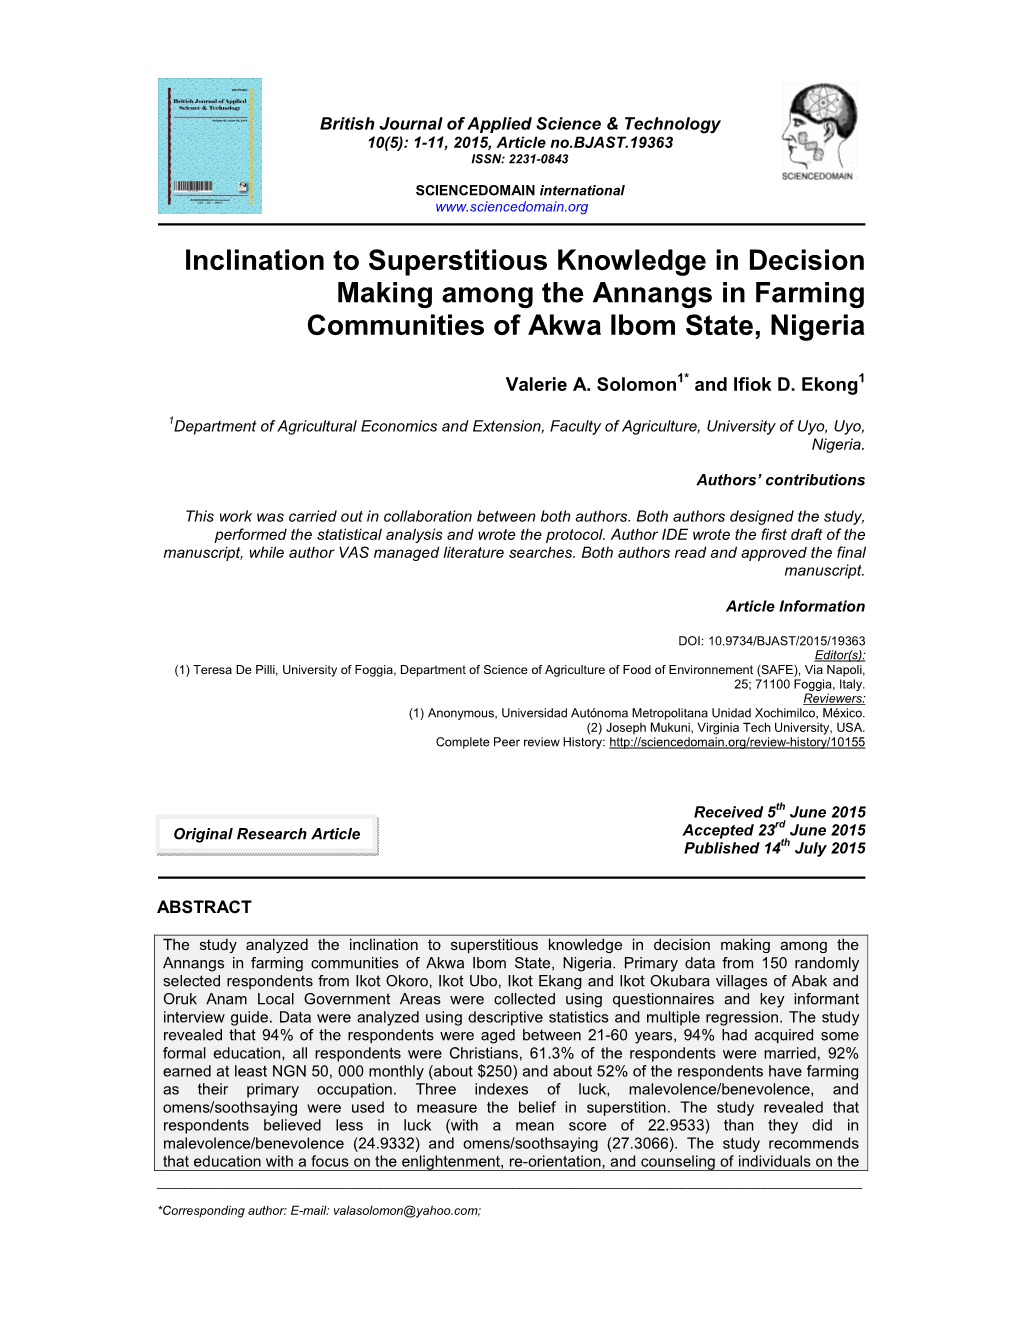 Inclination to Superstitious Knowledge in Decision Making Among the Annangs in Farming Communities of Akwa Ibom State, Nigeria